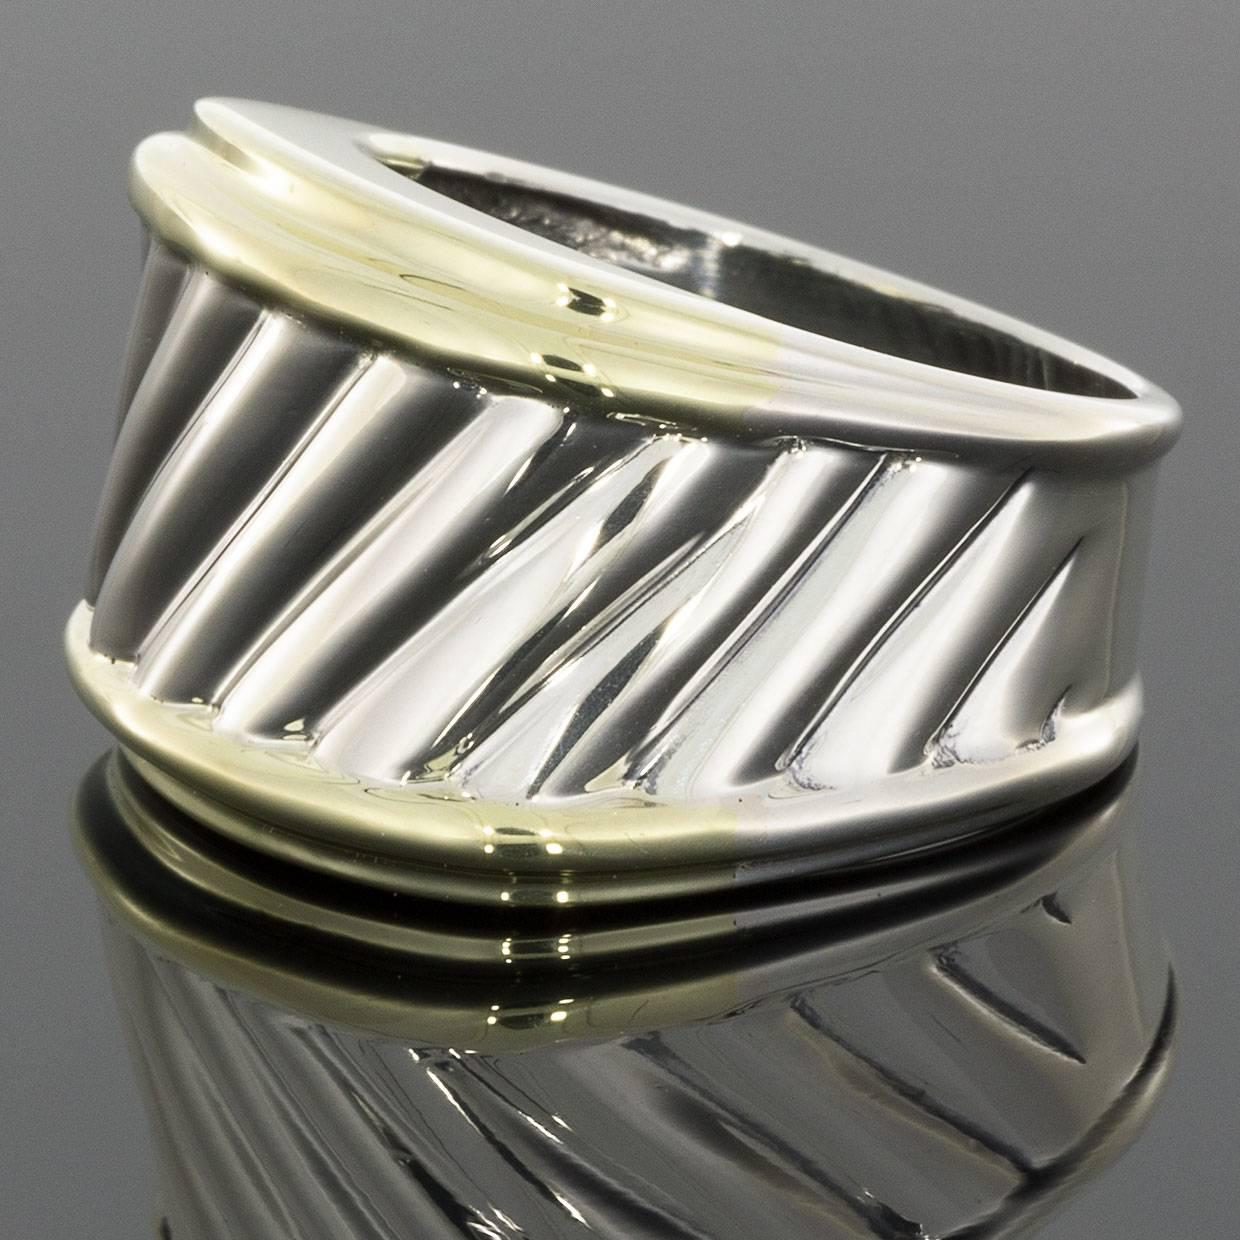 David Yurman's cable style jewelry has become his signature, the unifying element of every collection. This beautiful David Yurman ring is from the Thoroughbred Collection & features this signature cable design. David Yurman has created a unique &